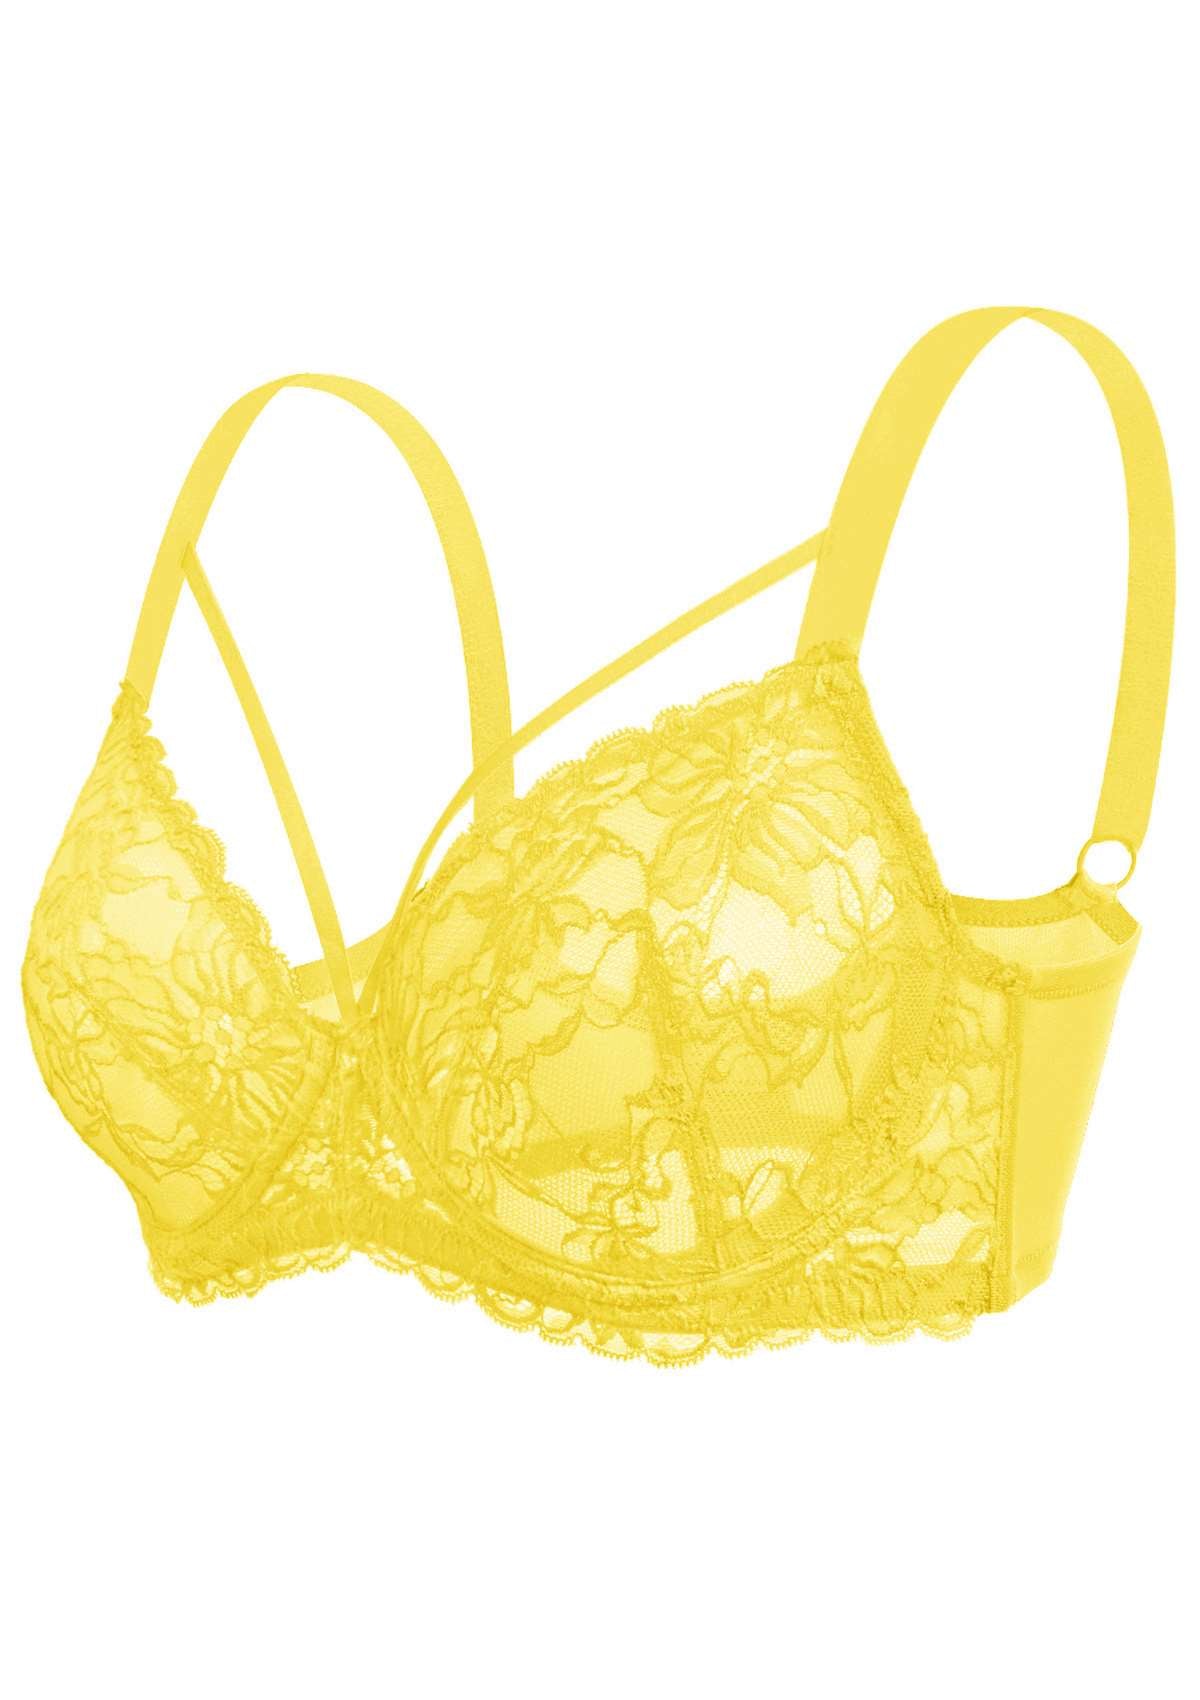 HSIA Unlined Lace Mesh Minimizer Bra For Large Breasts, Full Coverage - Bright Yellow / 40 / I